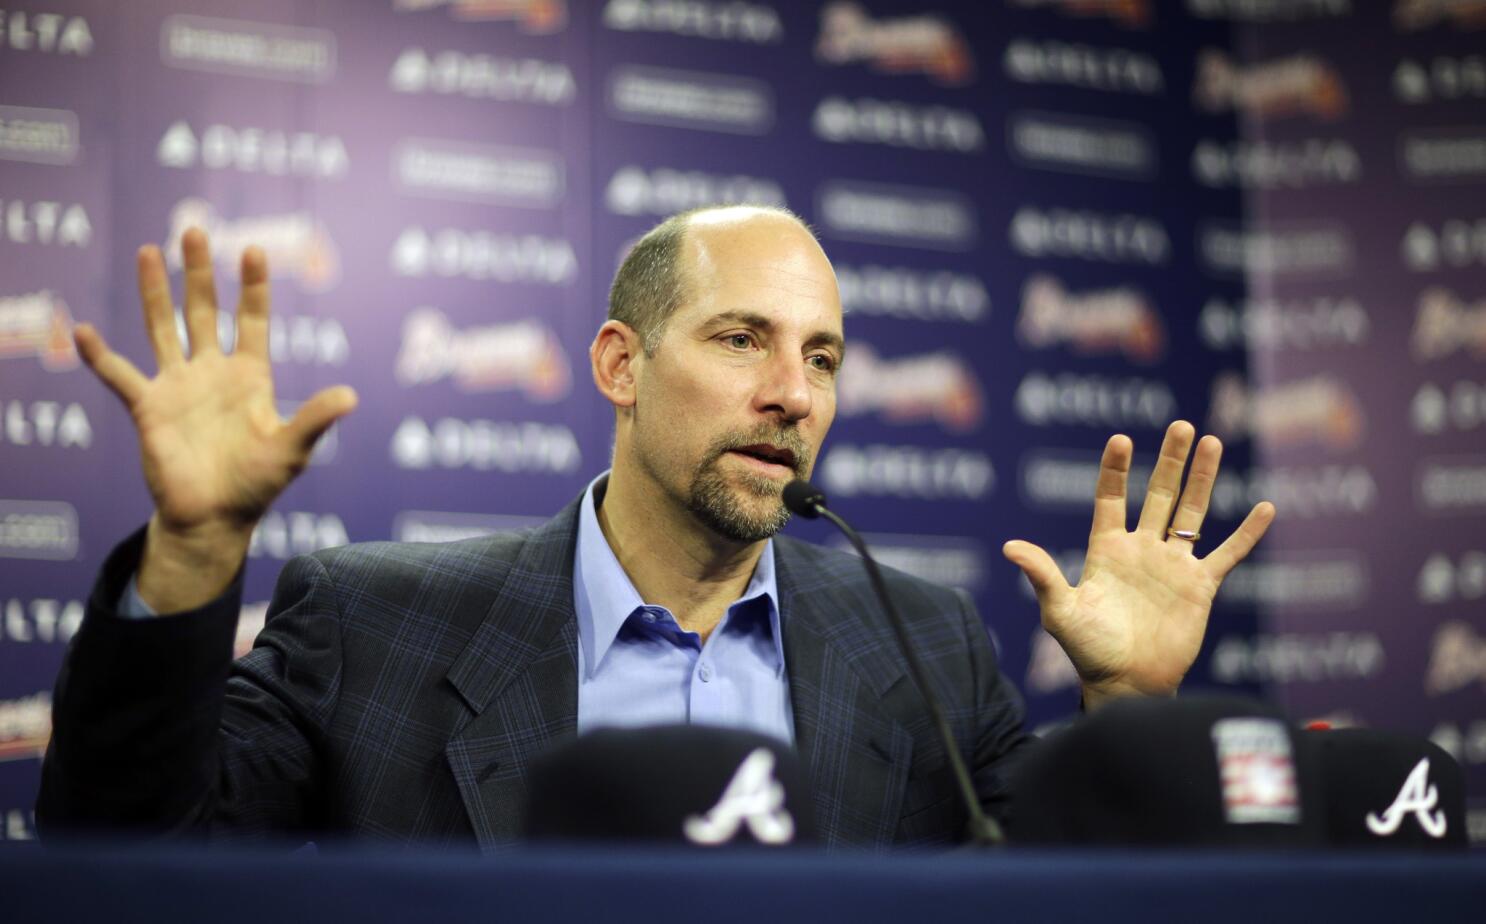 Hall of Famer John Smoltz approves voters' stance on players linked to PEDs  - Los Angeles Times